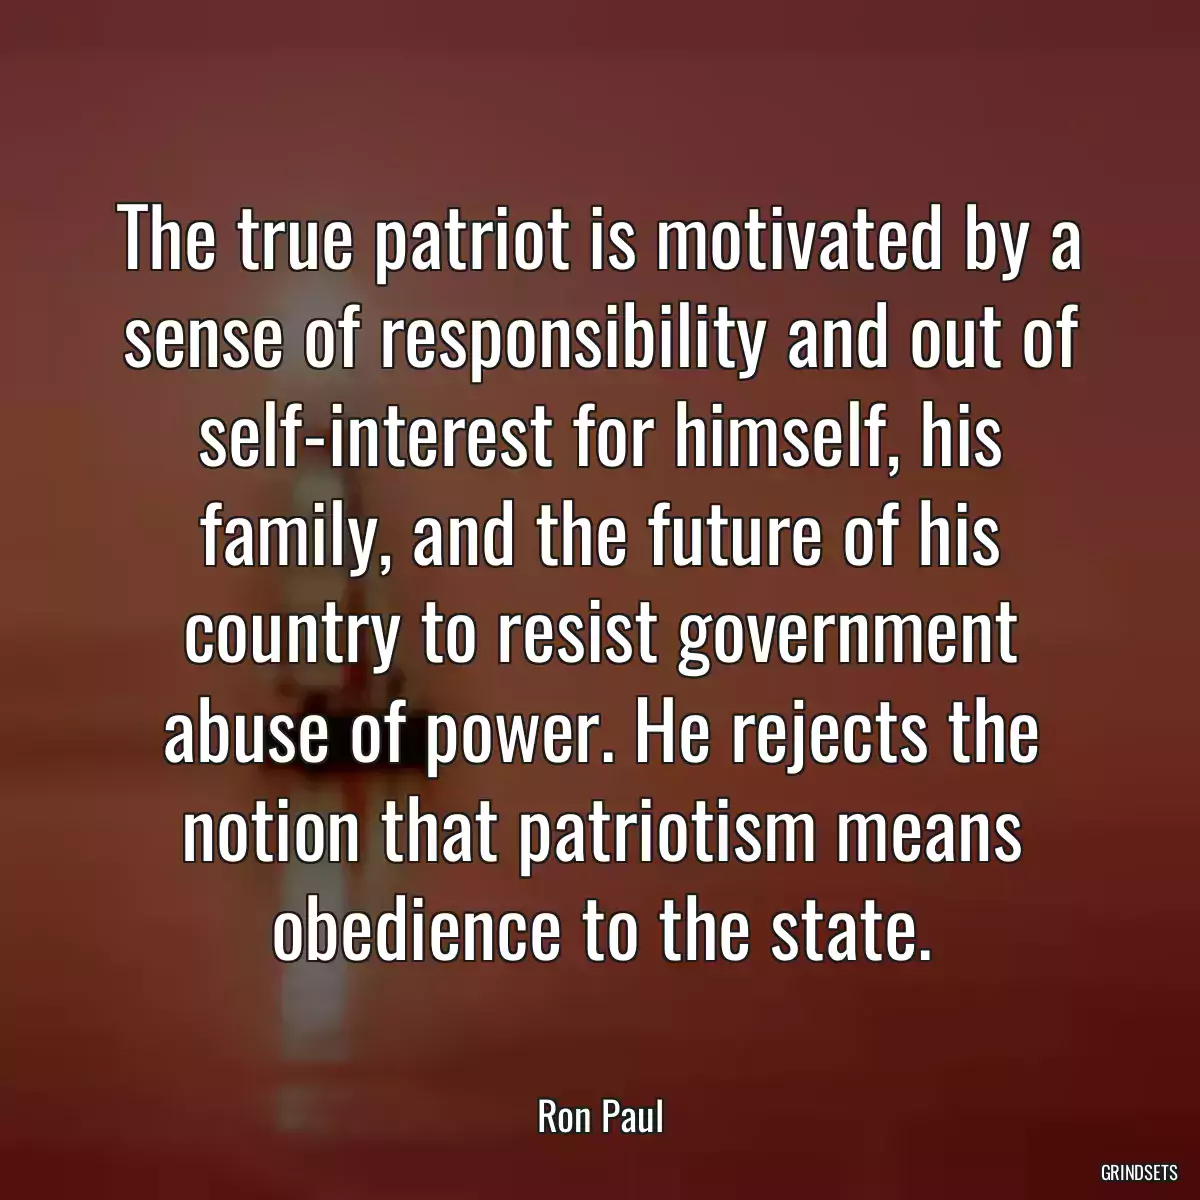 The true patriot is motivated by a sense of responsibility and out of self-interest for himself, his family, and the future of his country to resist government abuse of power. He rejects the notion that patriotism means obedience to the state.